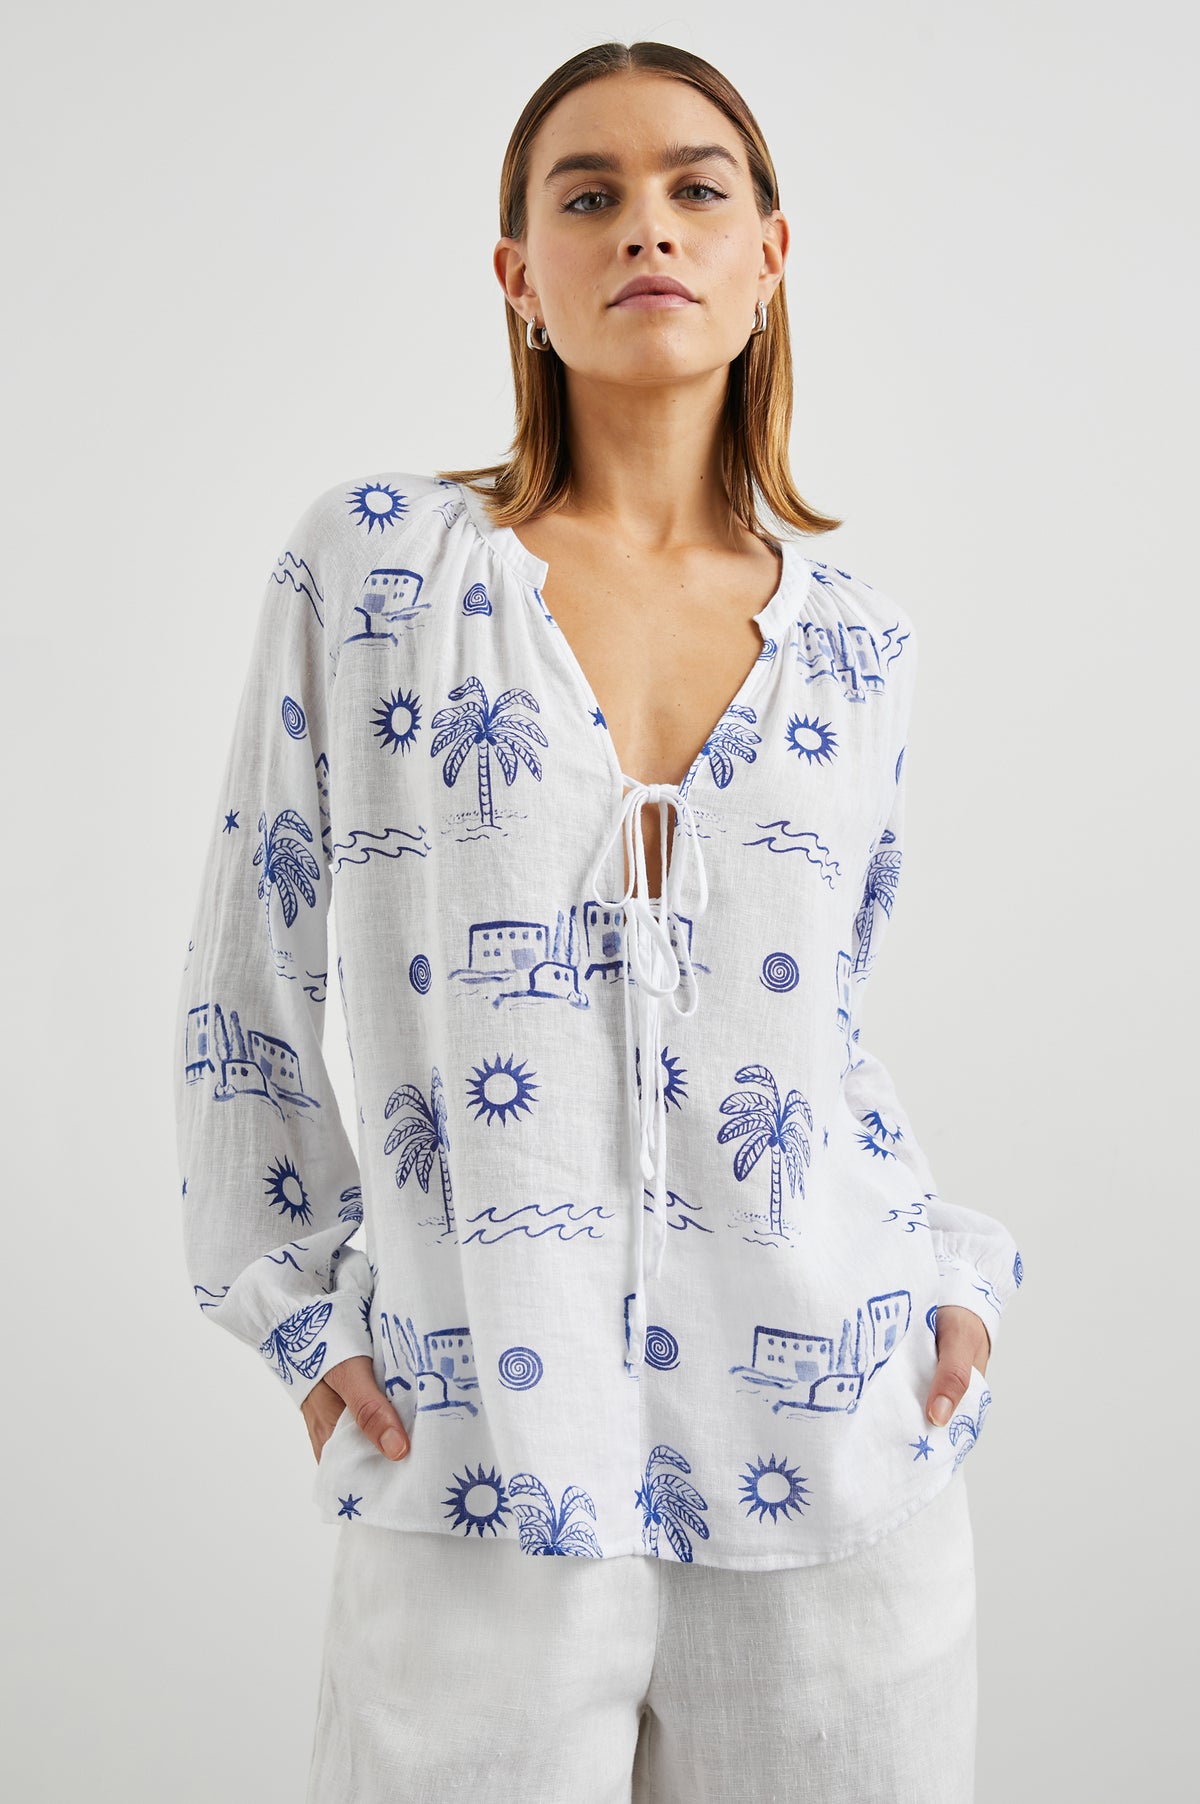 White shirt with blue sketch print